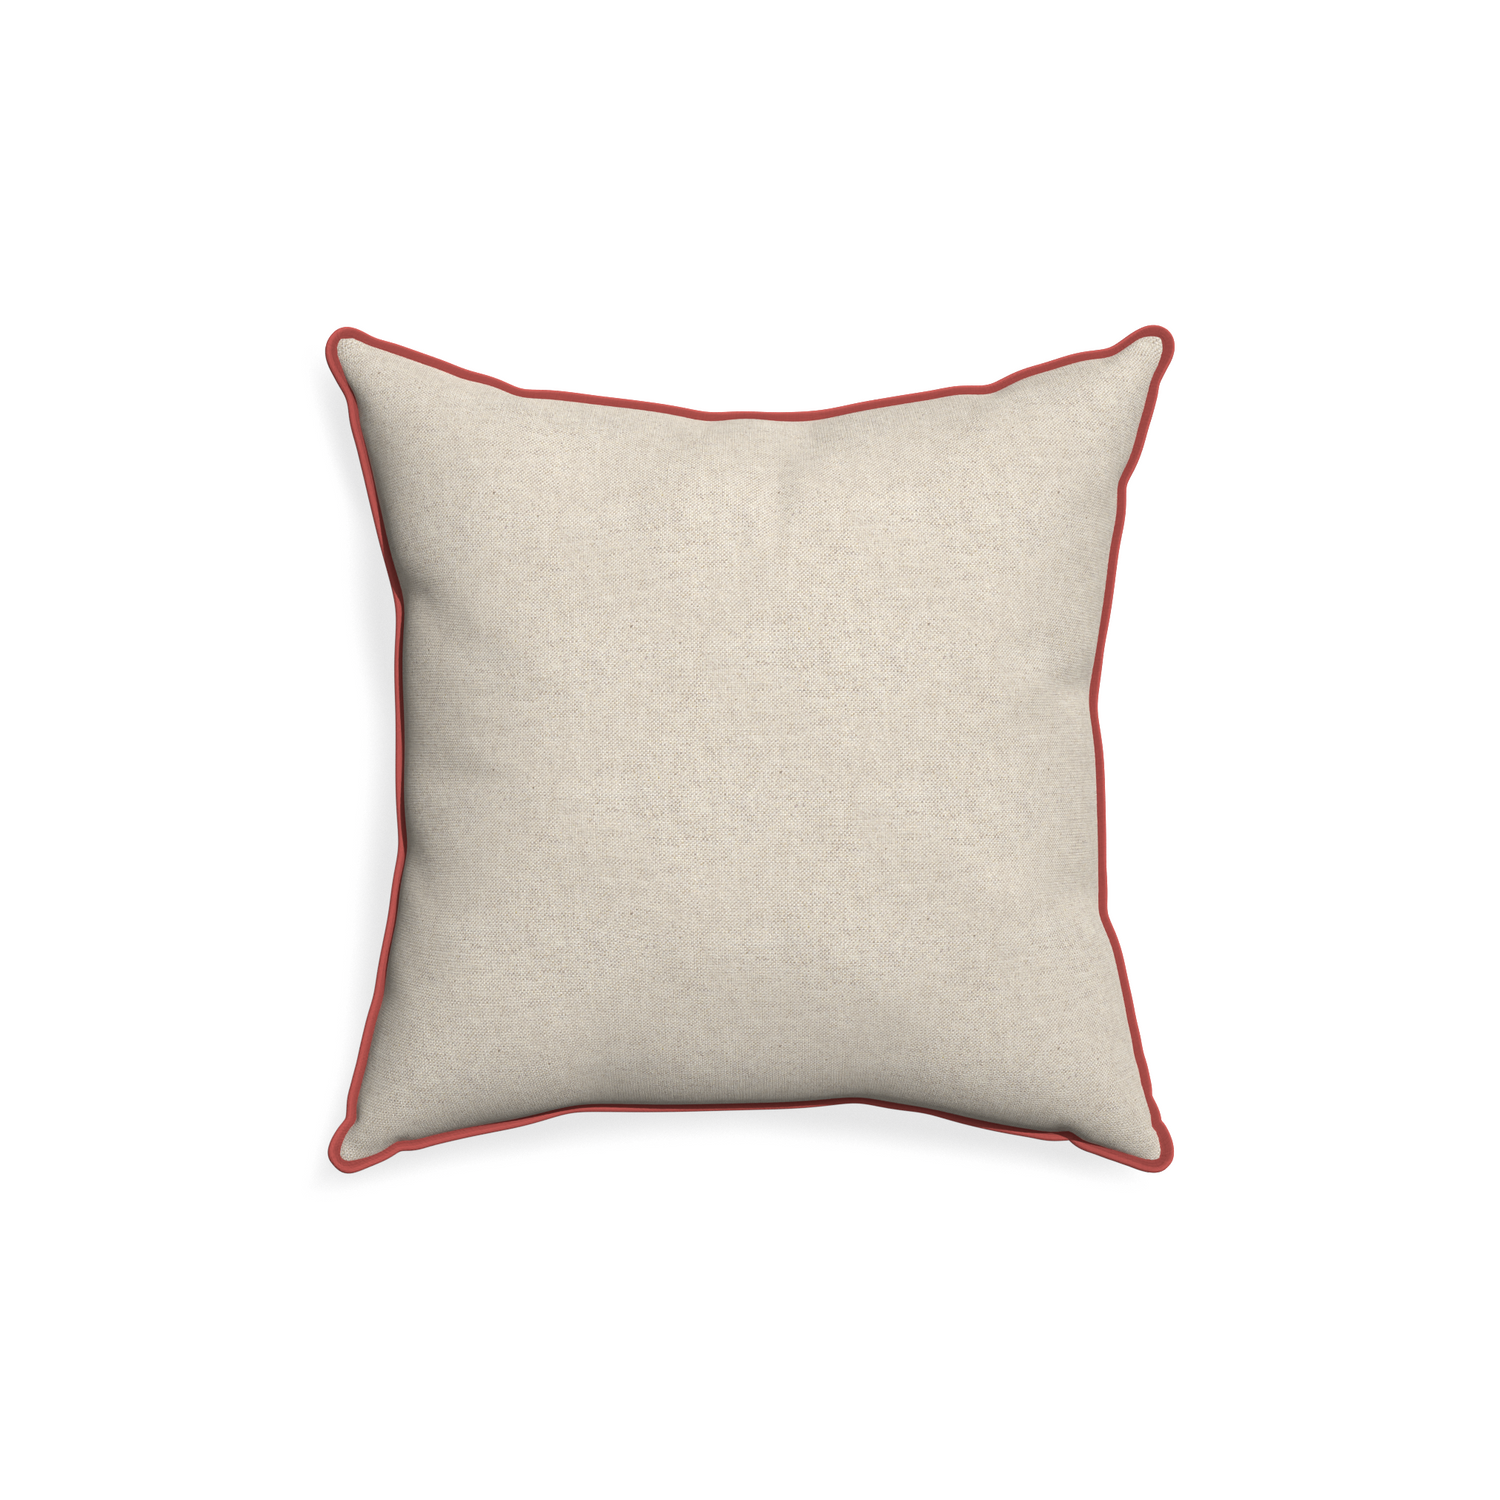 18-square oat custom pillow with c piping on white background